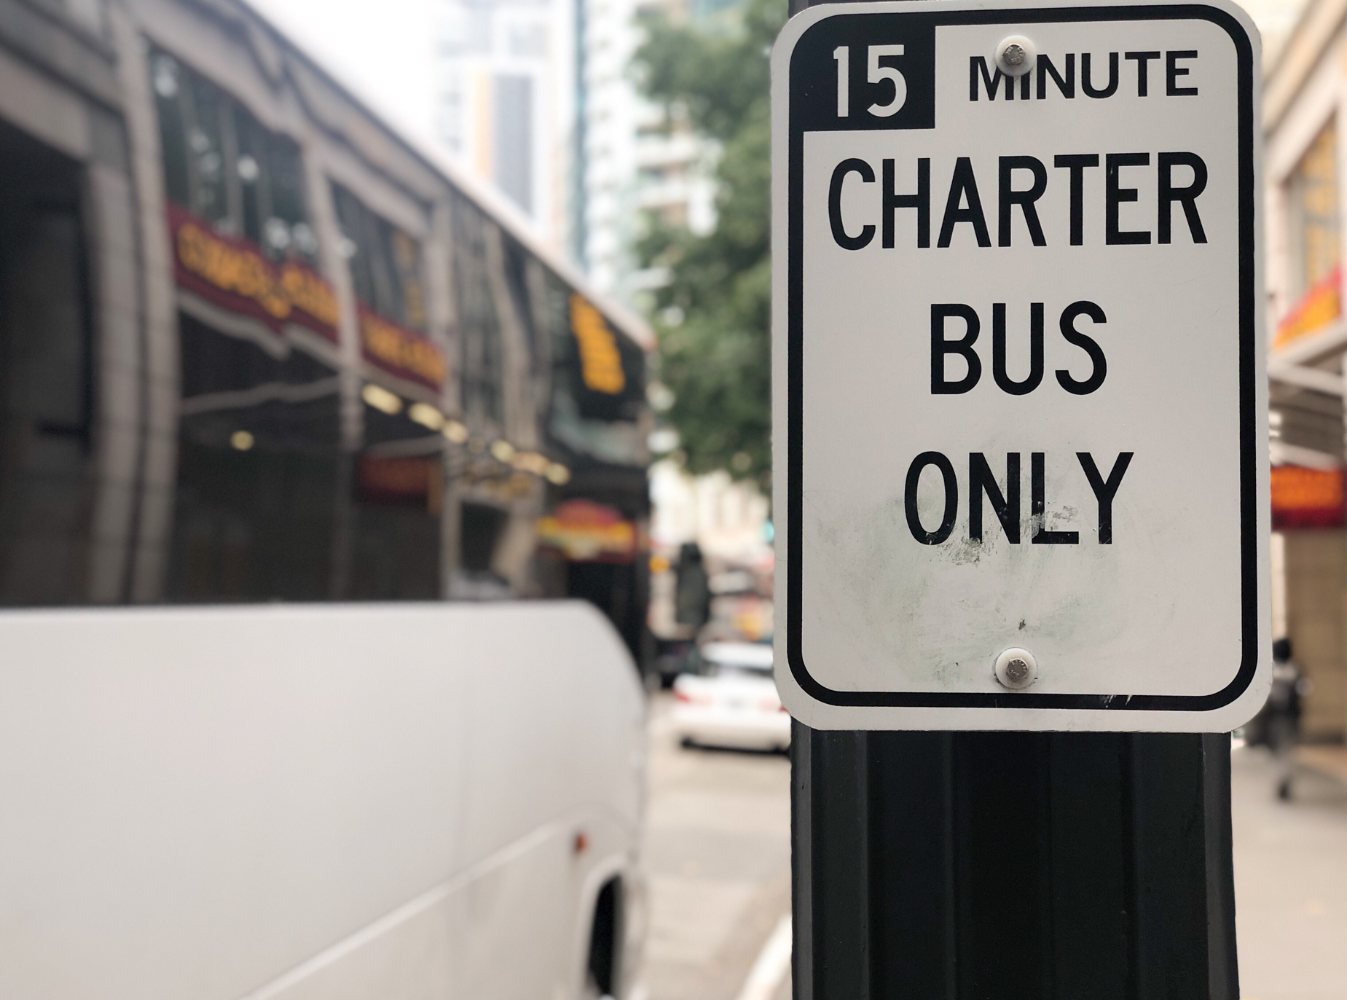 charter bus parking sign with charter bus nearby